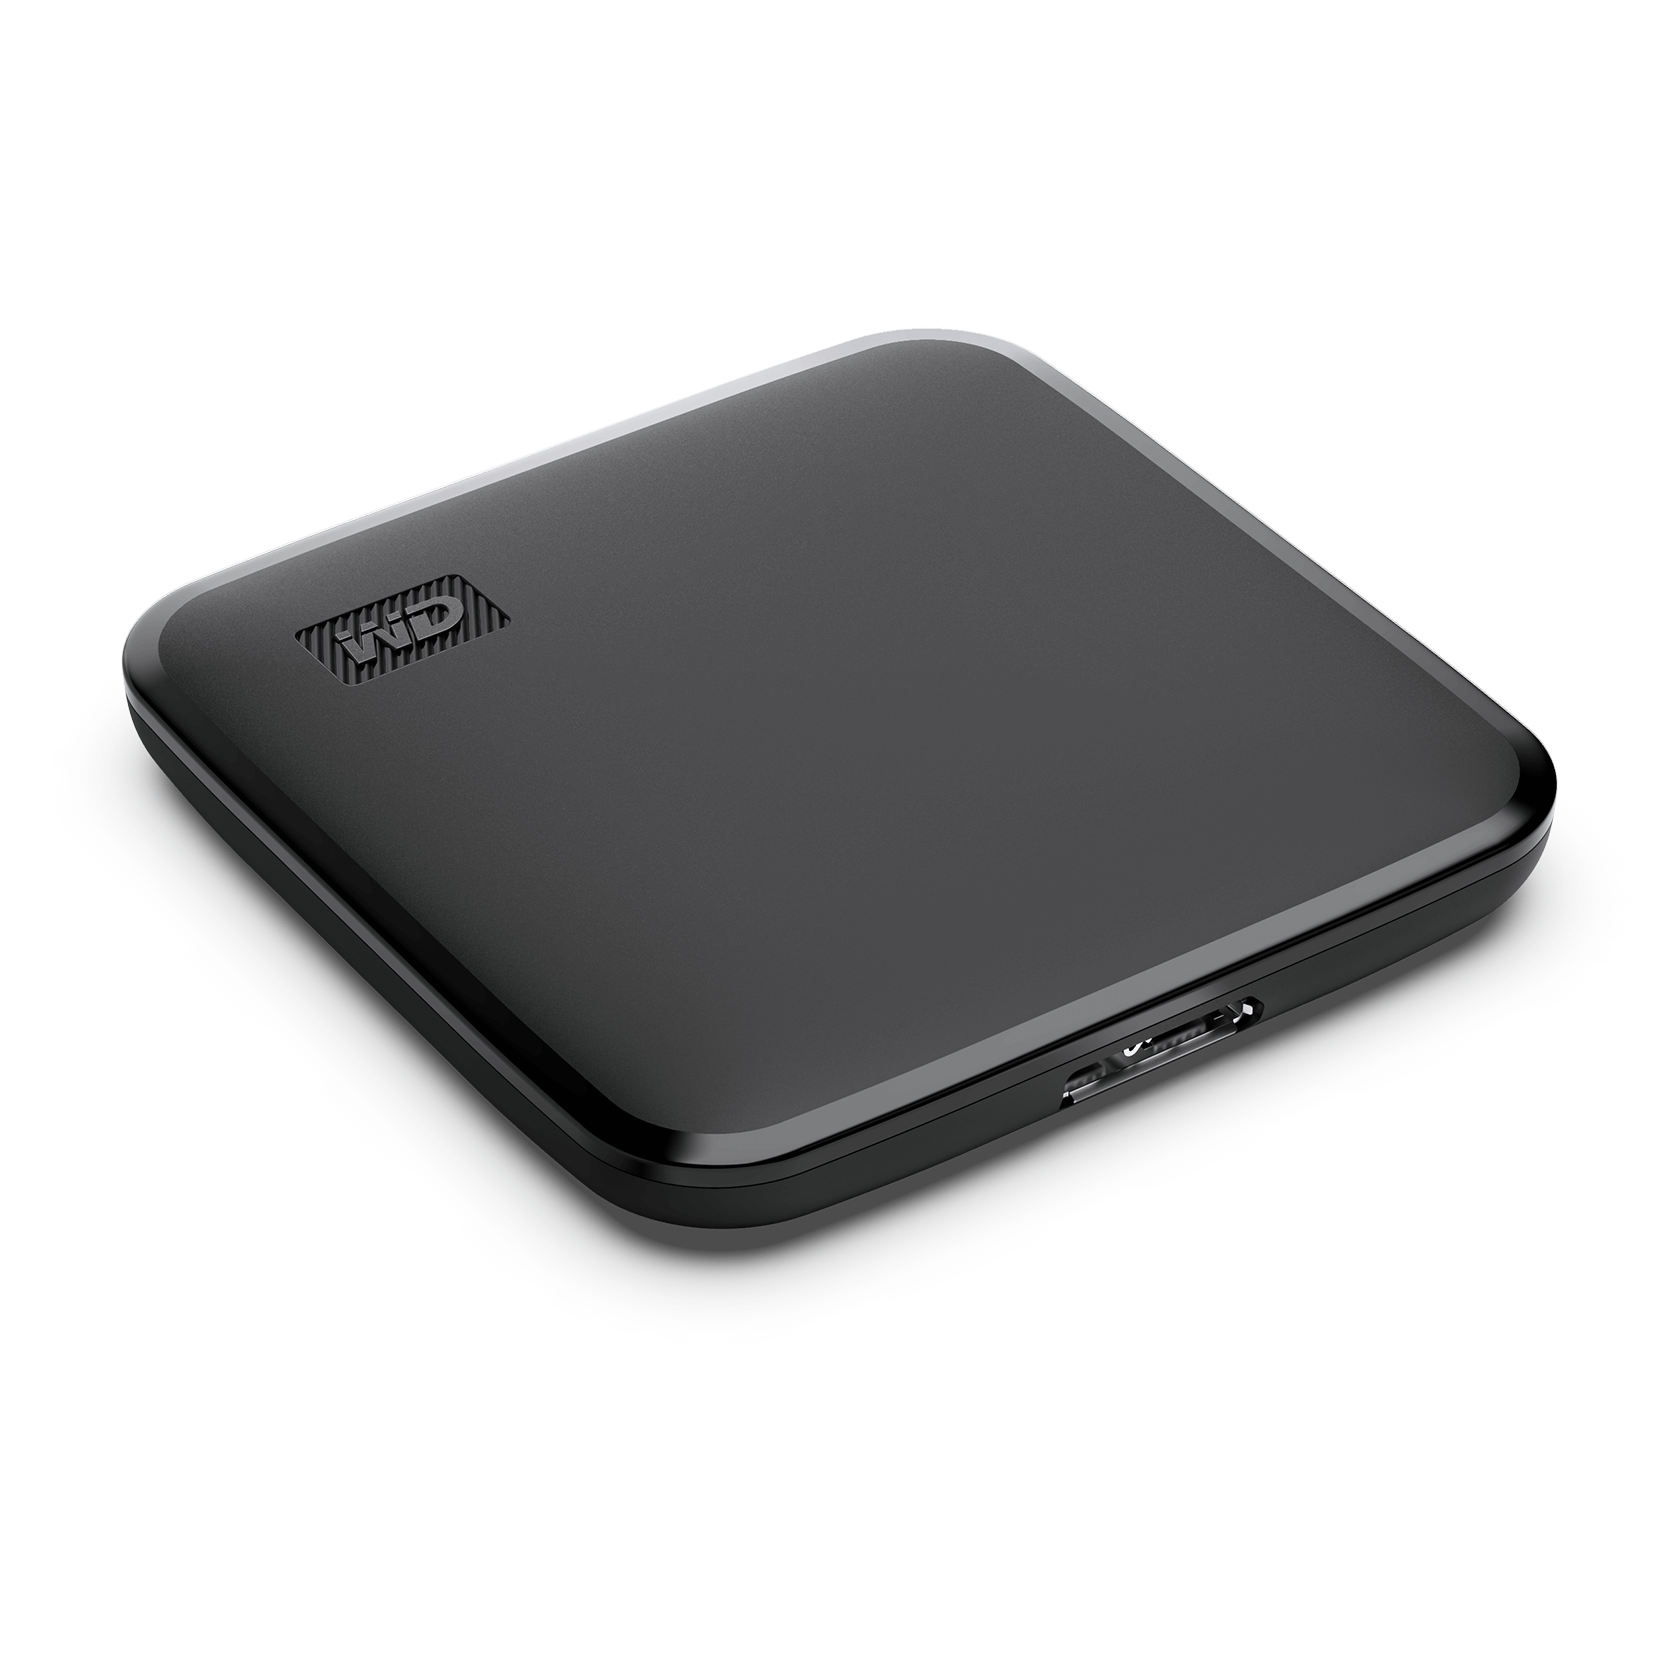 WD 1TB Elements SE SSD, Portable External Solid State Drive - WDBAYN0010BBK-WESN - image 4 of 8